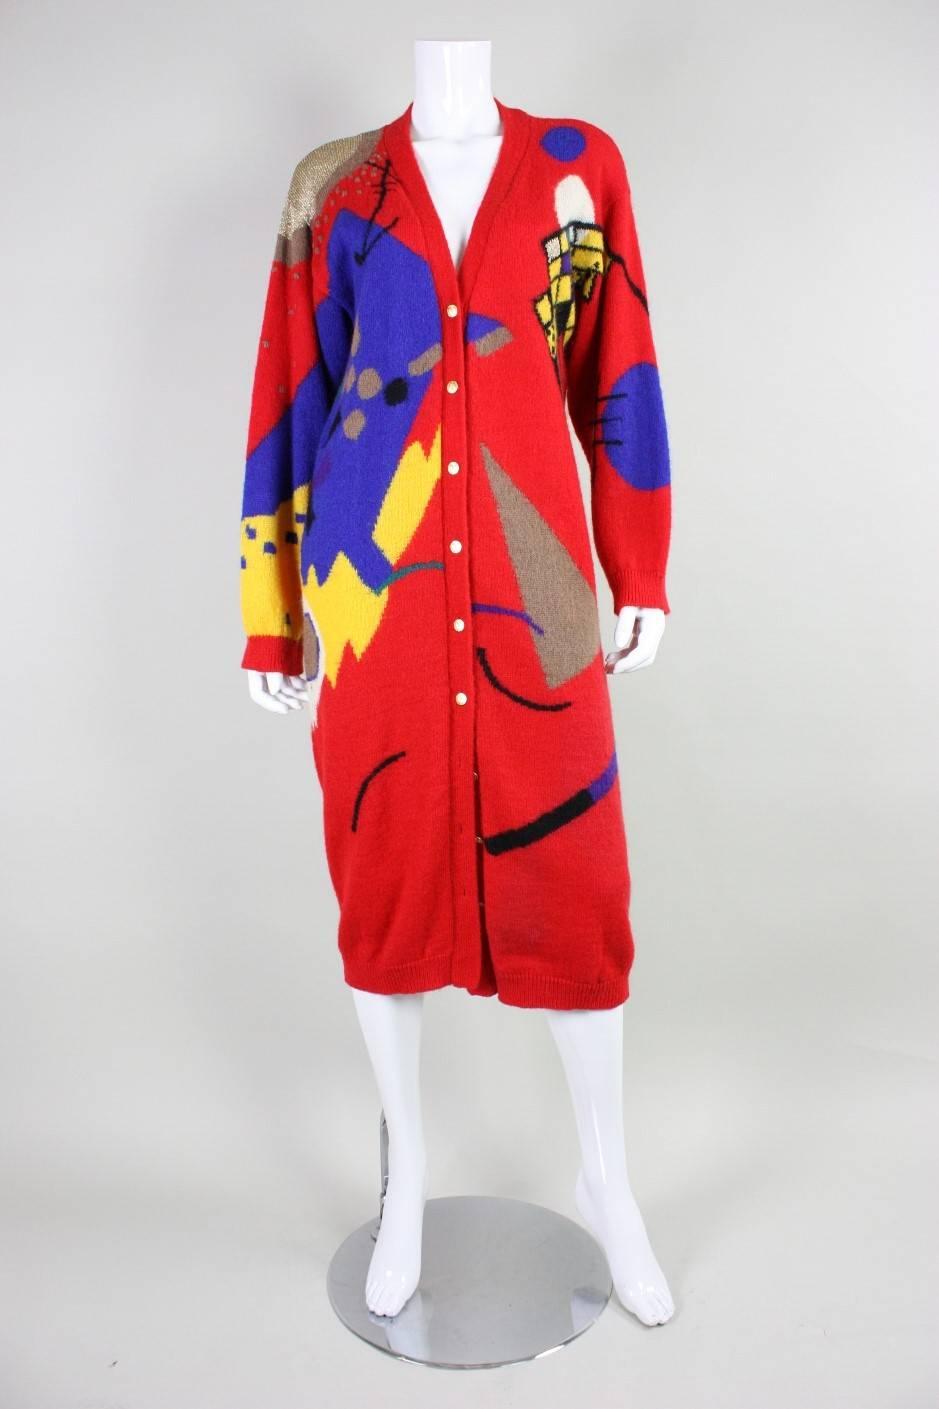 Vintage cardigan from Hanae Mori dates to the 1980's and is made of red acrylic and wool.  It features a bold graphic abstract print in bright colors.  Cardigan features ribbed trim along edges.  Center front gold-toned button closures.  Unlined.